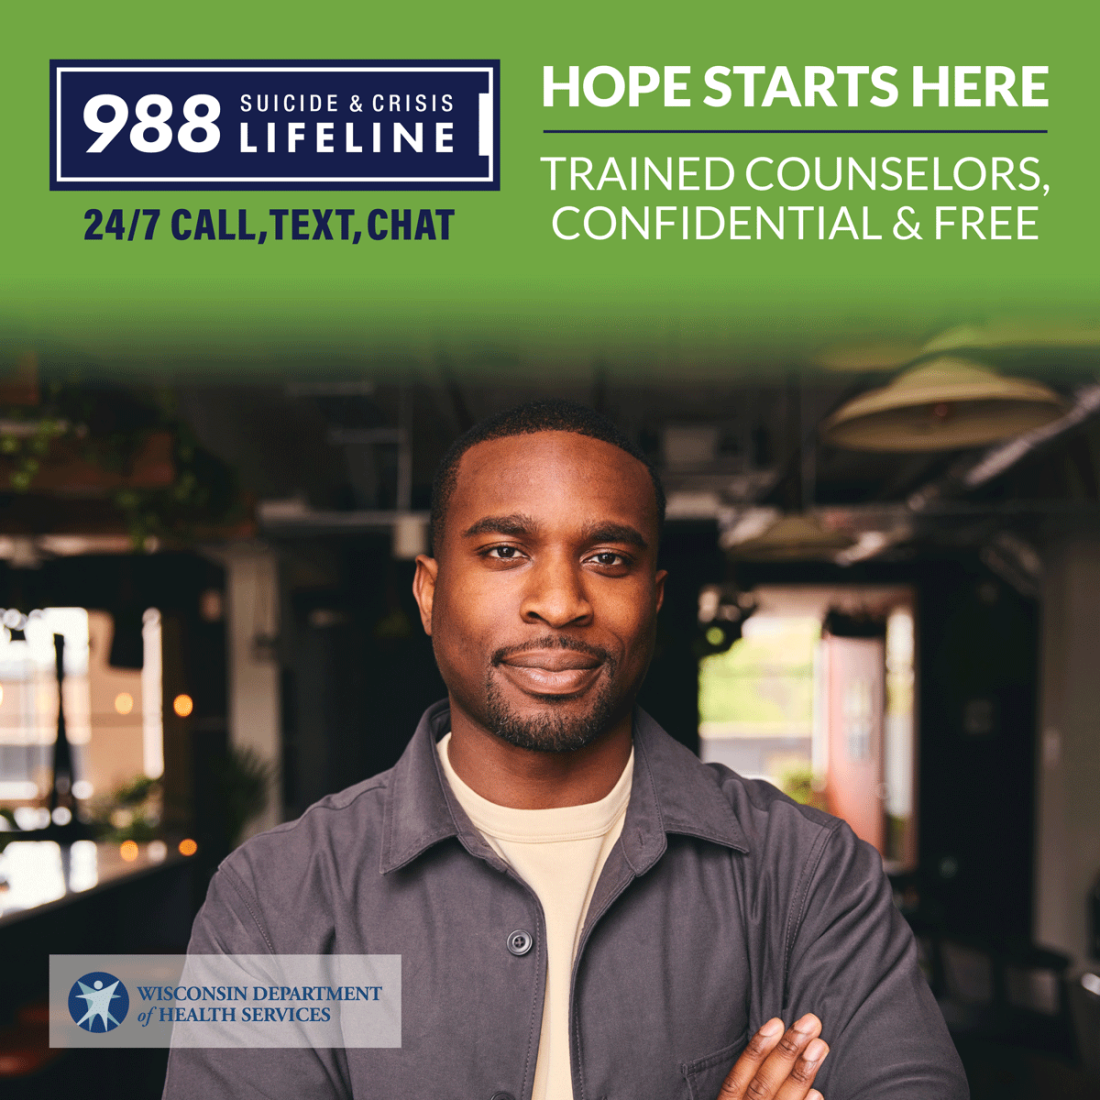 Adult - Hope starts here - 988 Suicide & Crisis Lifeline 24/7 Call, Text, Chat